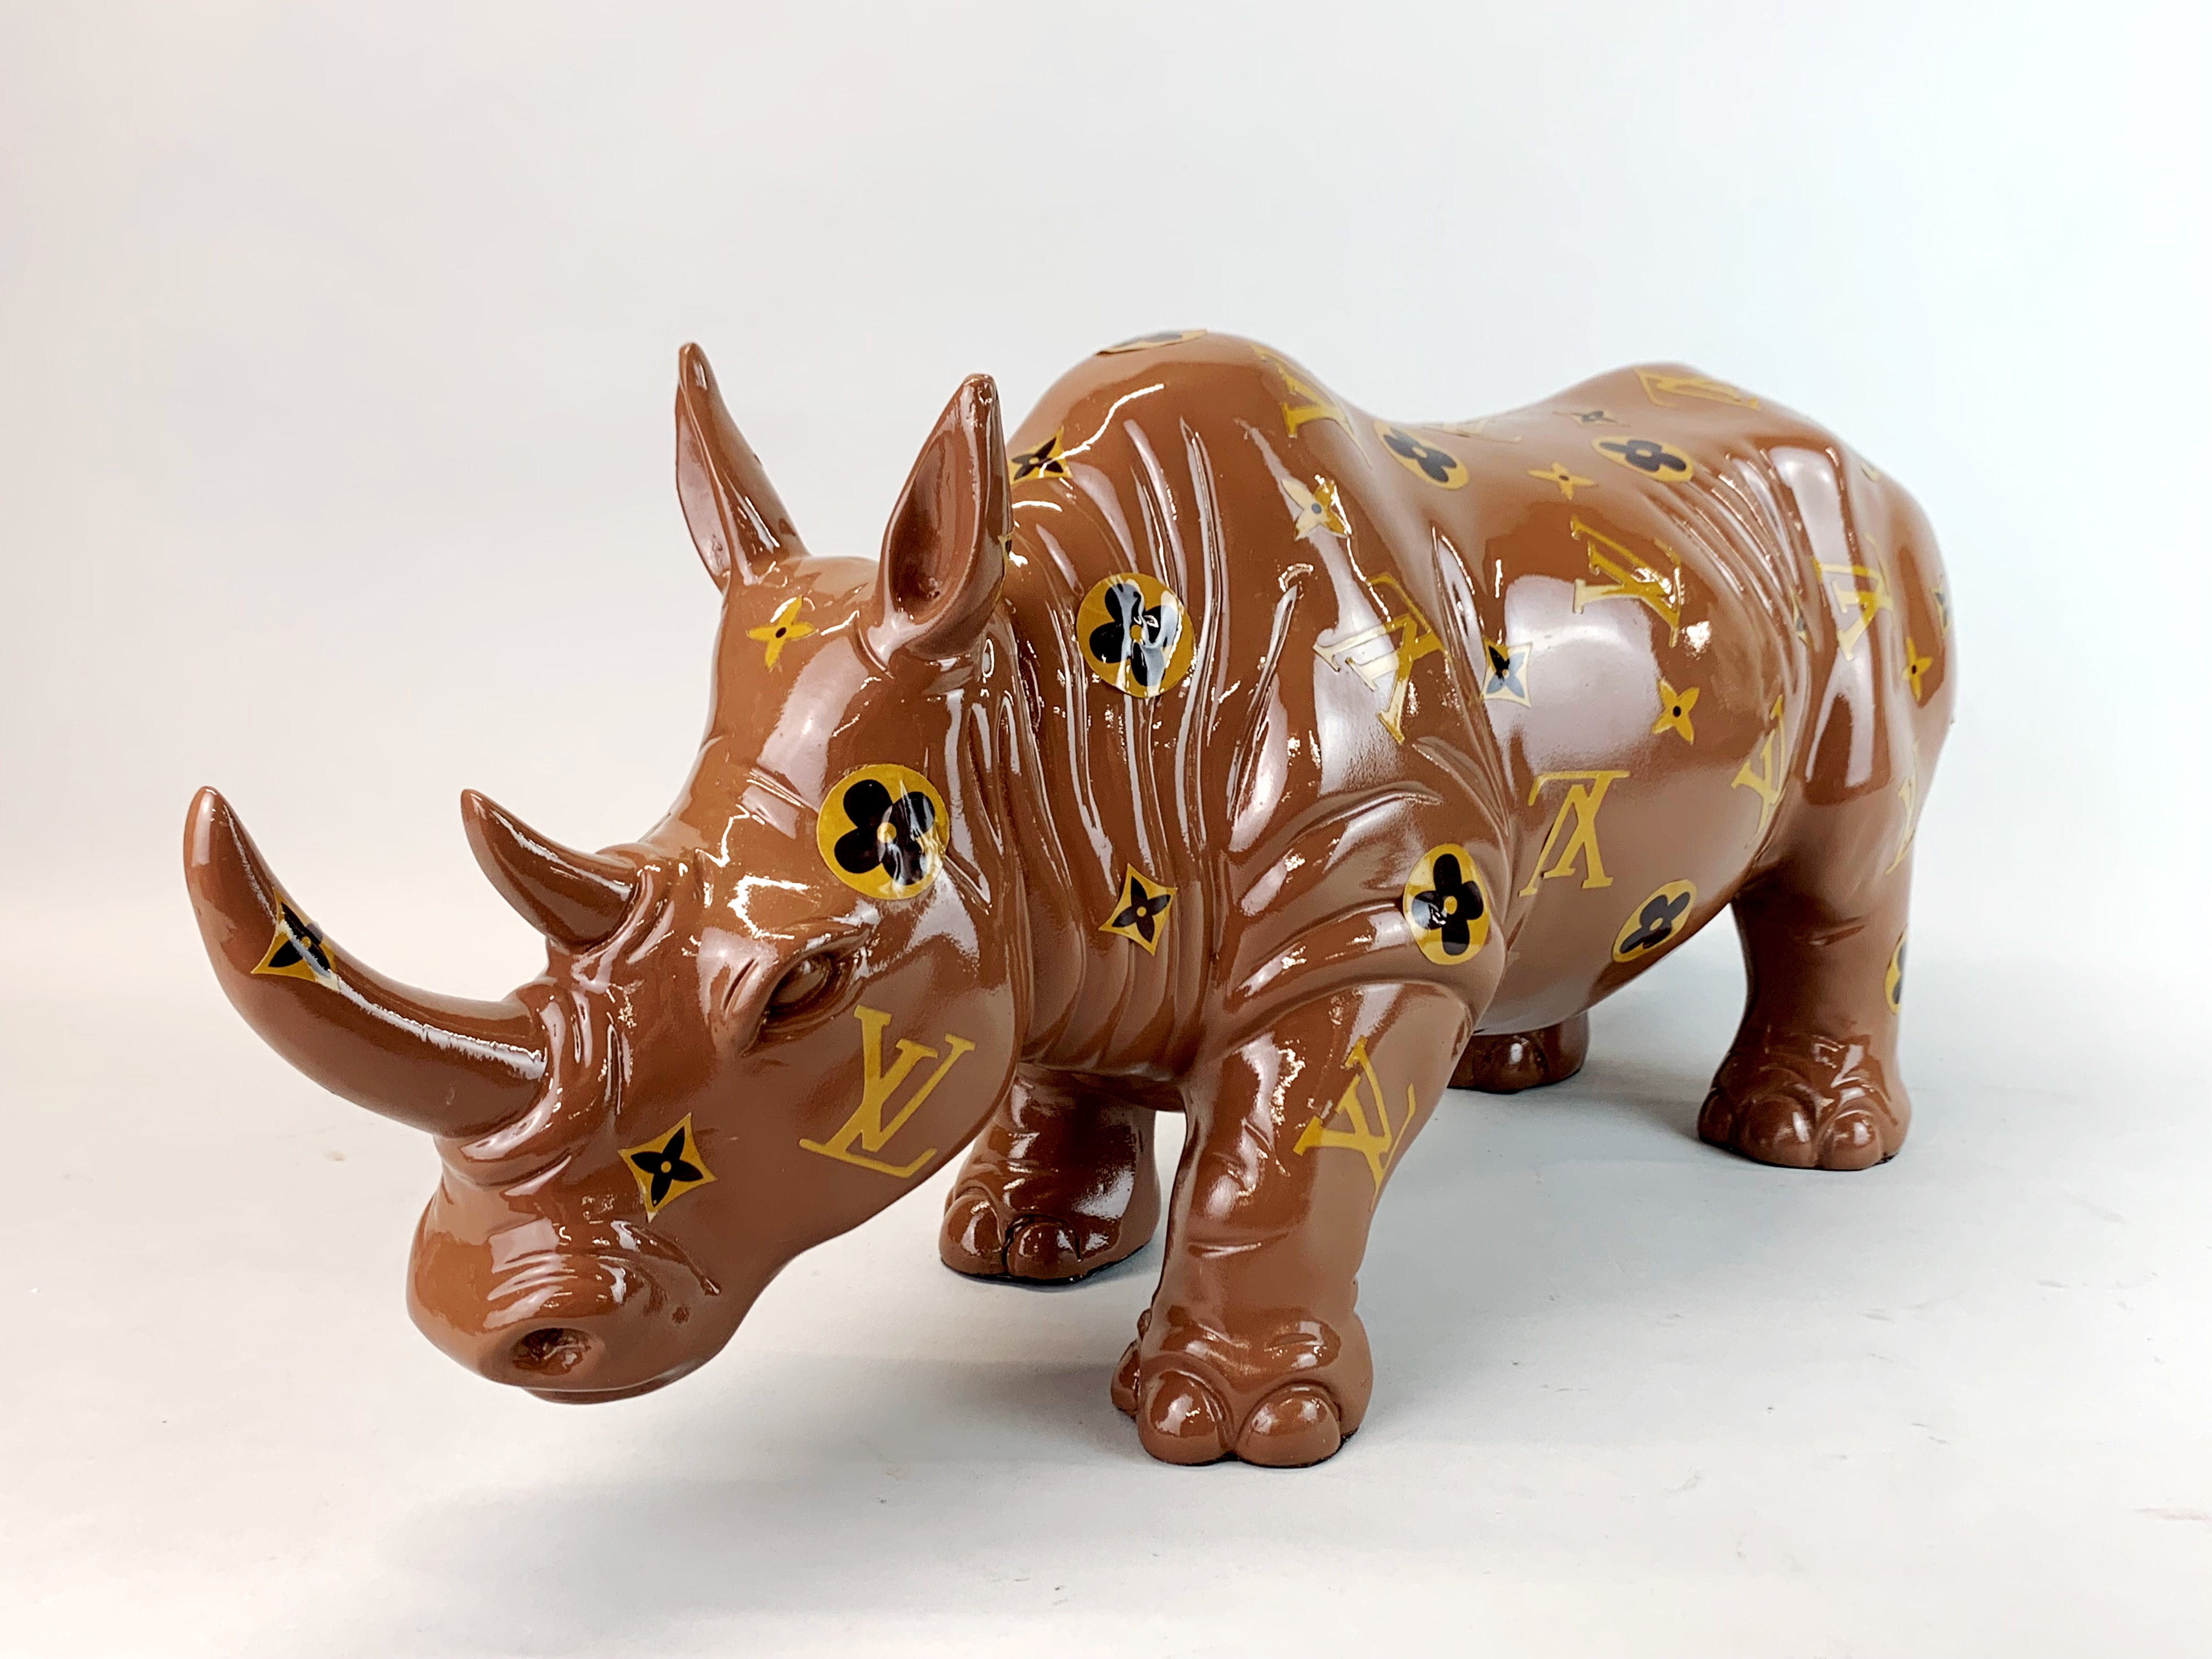 A composition rhino sculpture with applied paper decoration, H. 23cm, L. 50cm. - Image 3 of 3